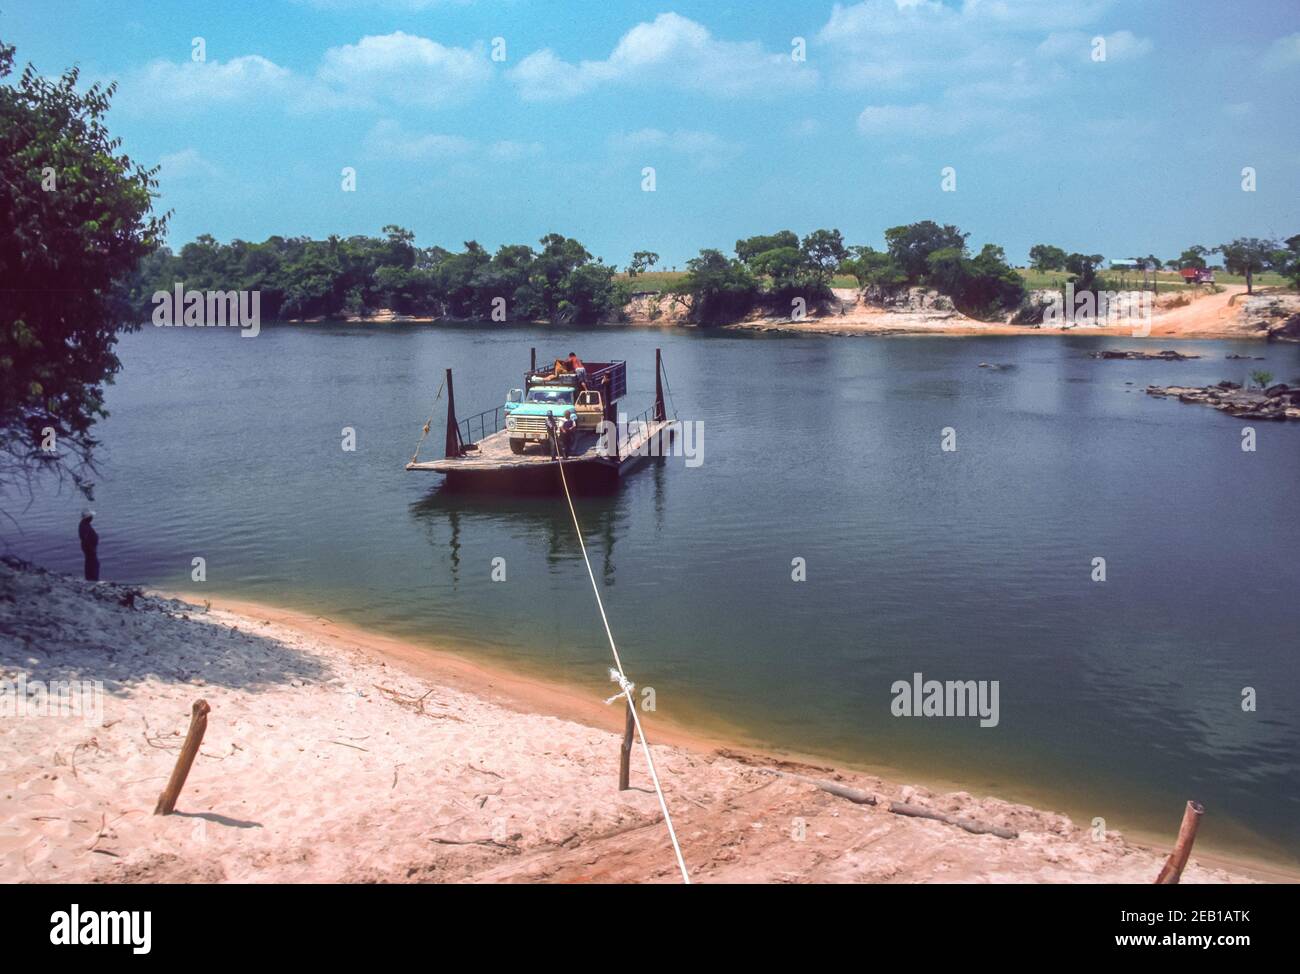 APURE STATE, VENEZUELA - Truck on river ferry pulled by hand across Cano La Pica River. Stock Photo